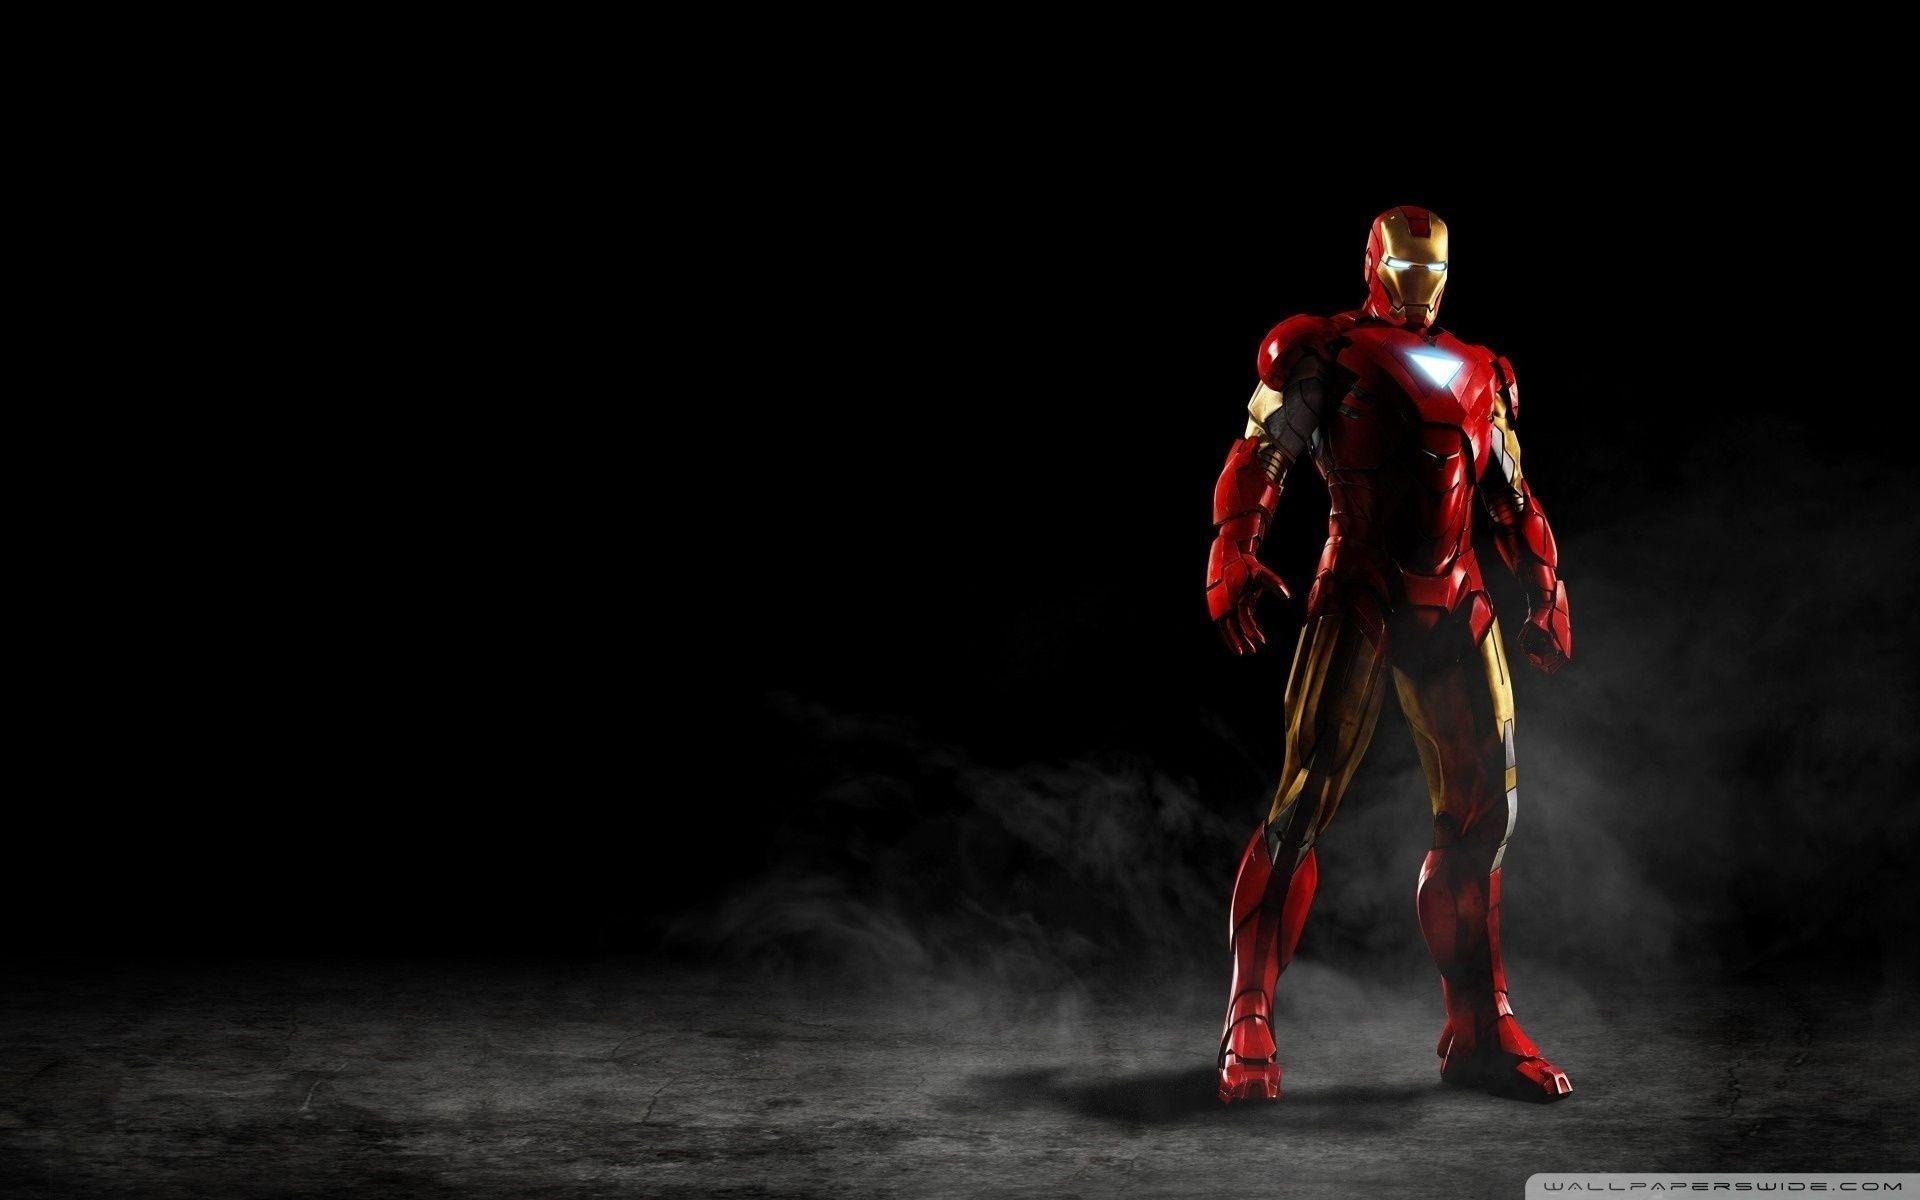 Desktop Wallpaper High Definition in 1080p with Iron Man Picture | HD  Wallpapers for Free | Chiến binh, Người sắt, Thiệp